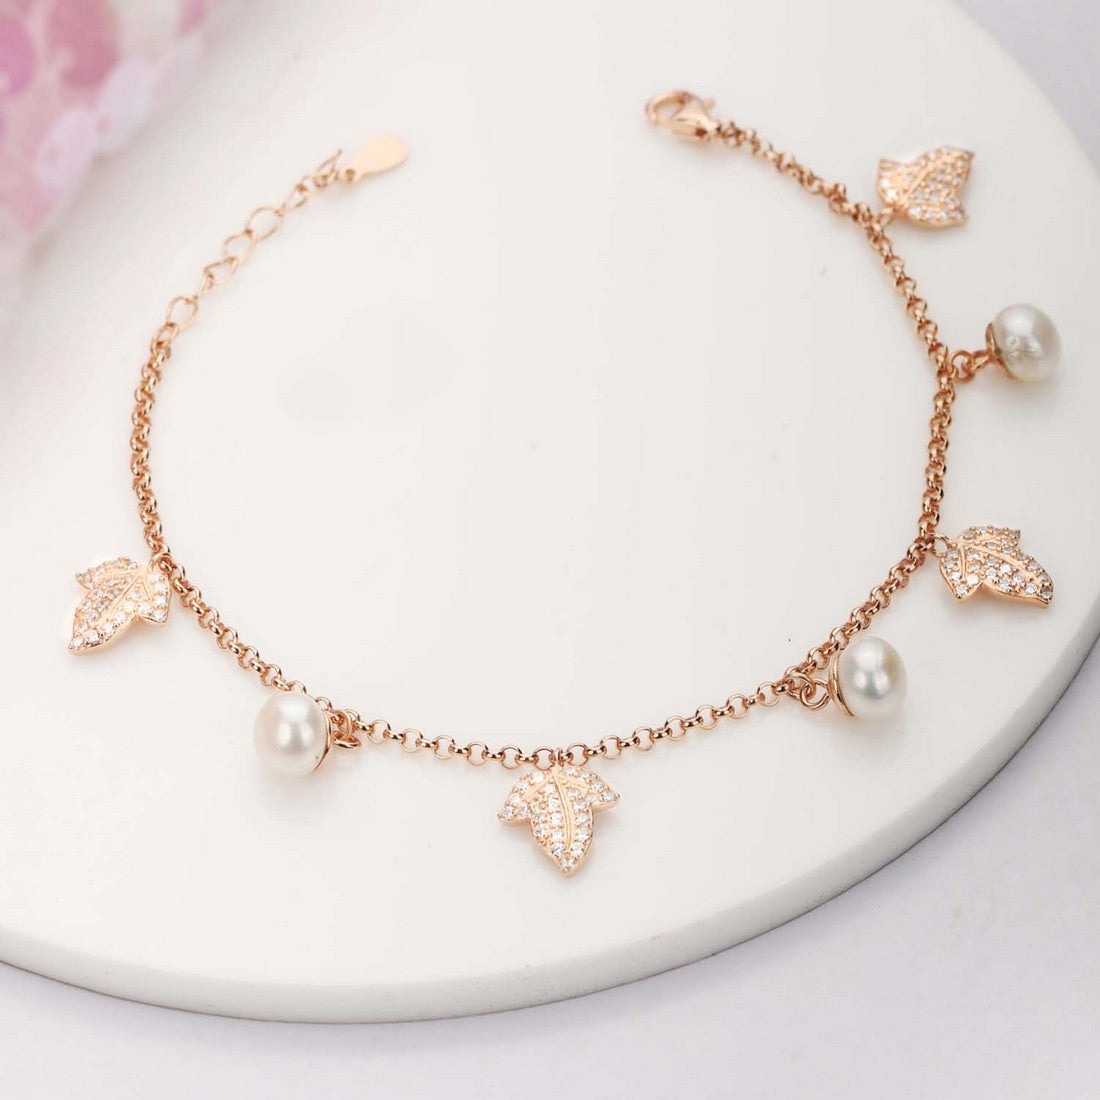 Twinkling Leaves and Cute Pearls Charm 925 Silver Bracelet